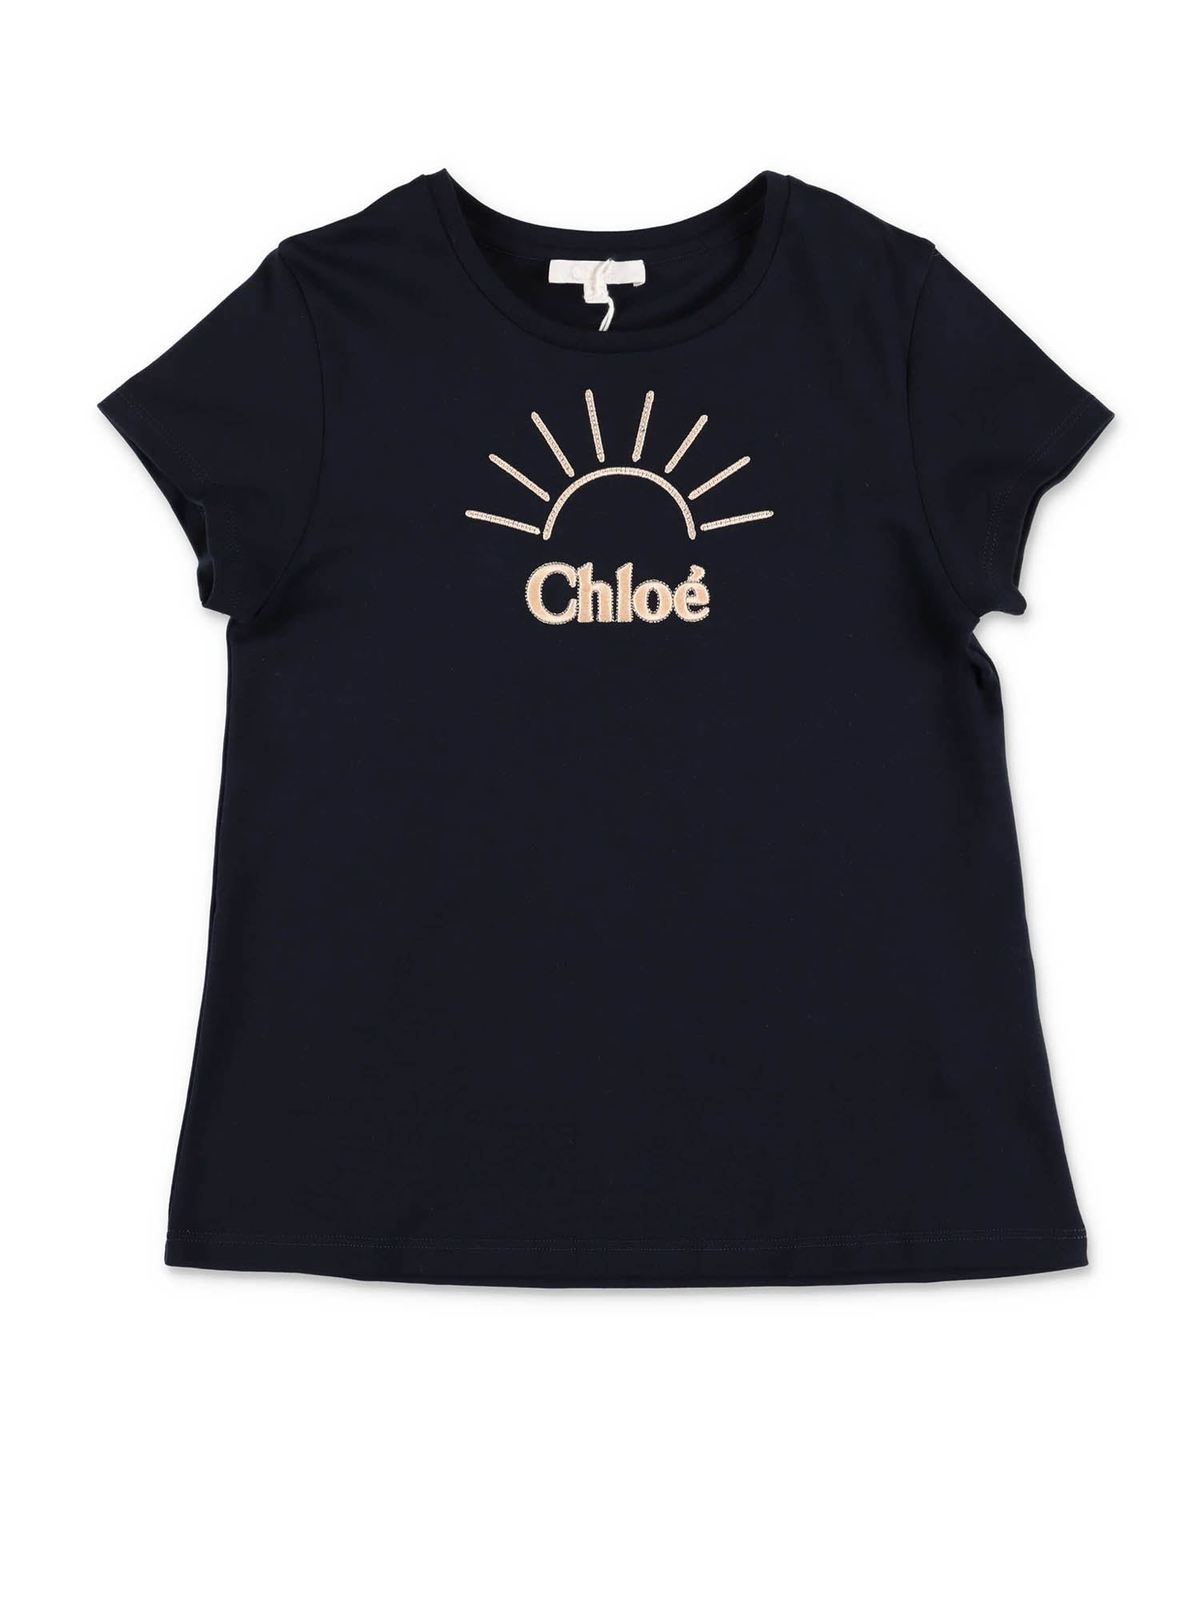 CHLOÉ EMBROIDERED LOGO T-SHIRT IN DARK BLUE